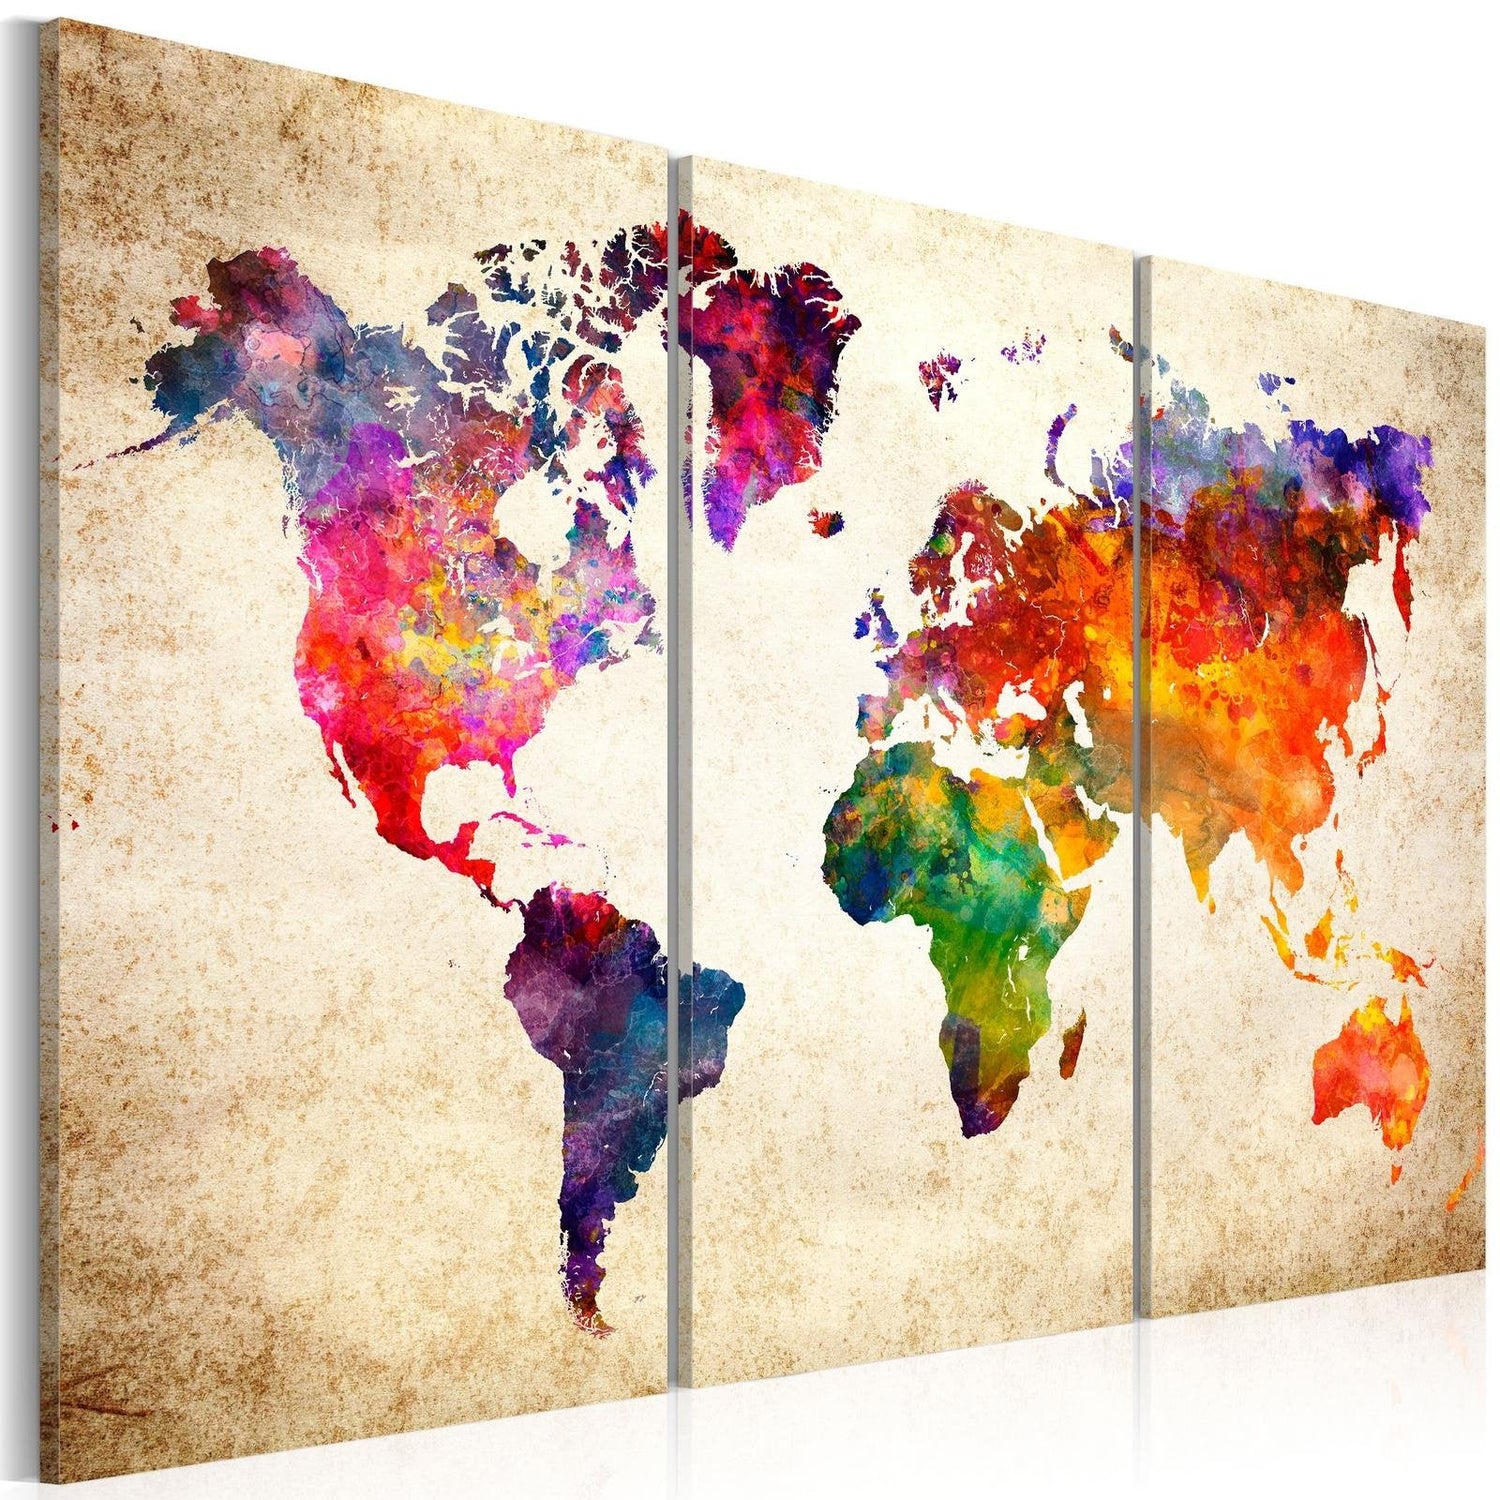 Stretched Canvas World Map Art - The World'S Map In Watercolor-Tiptophomedecor